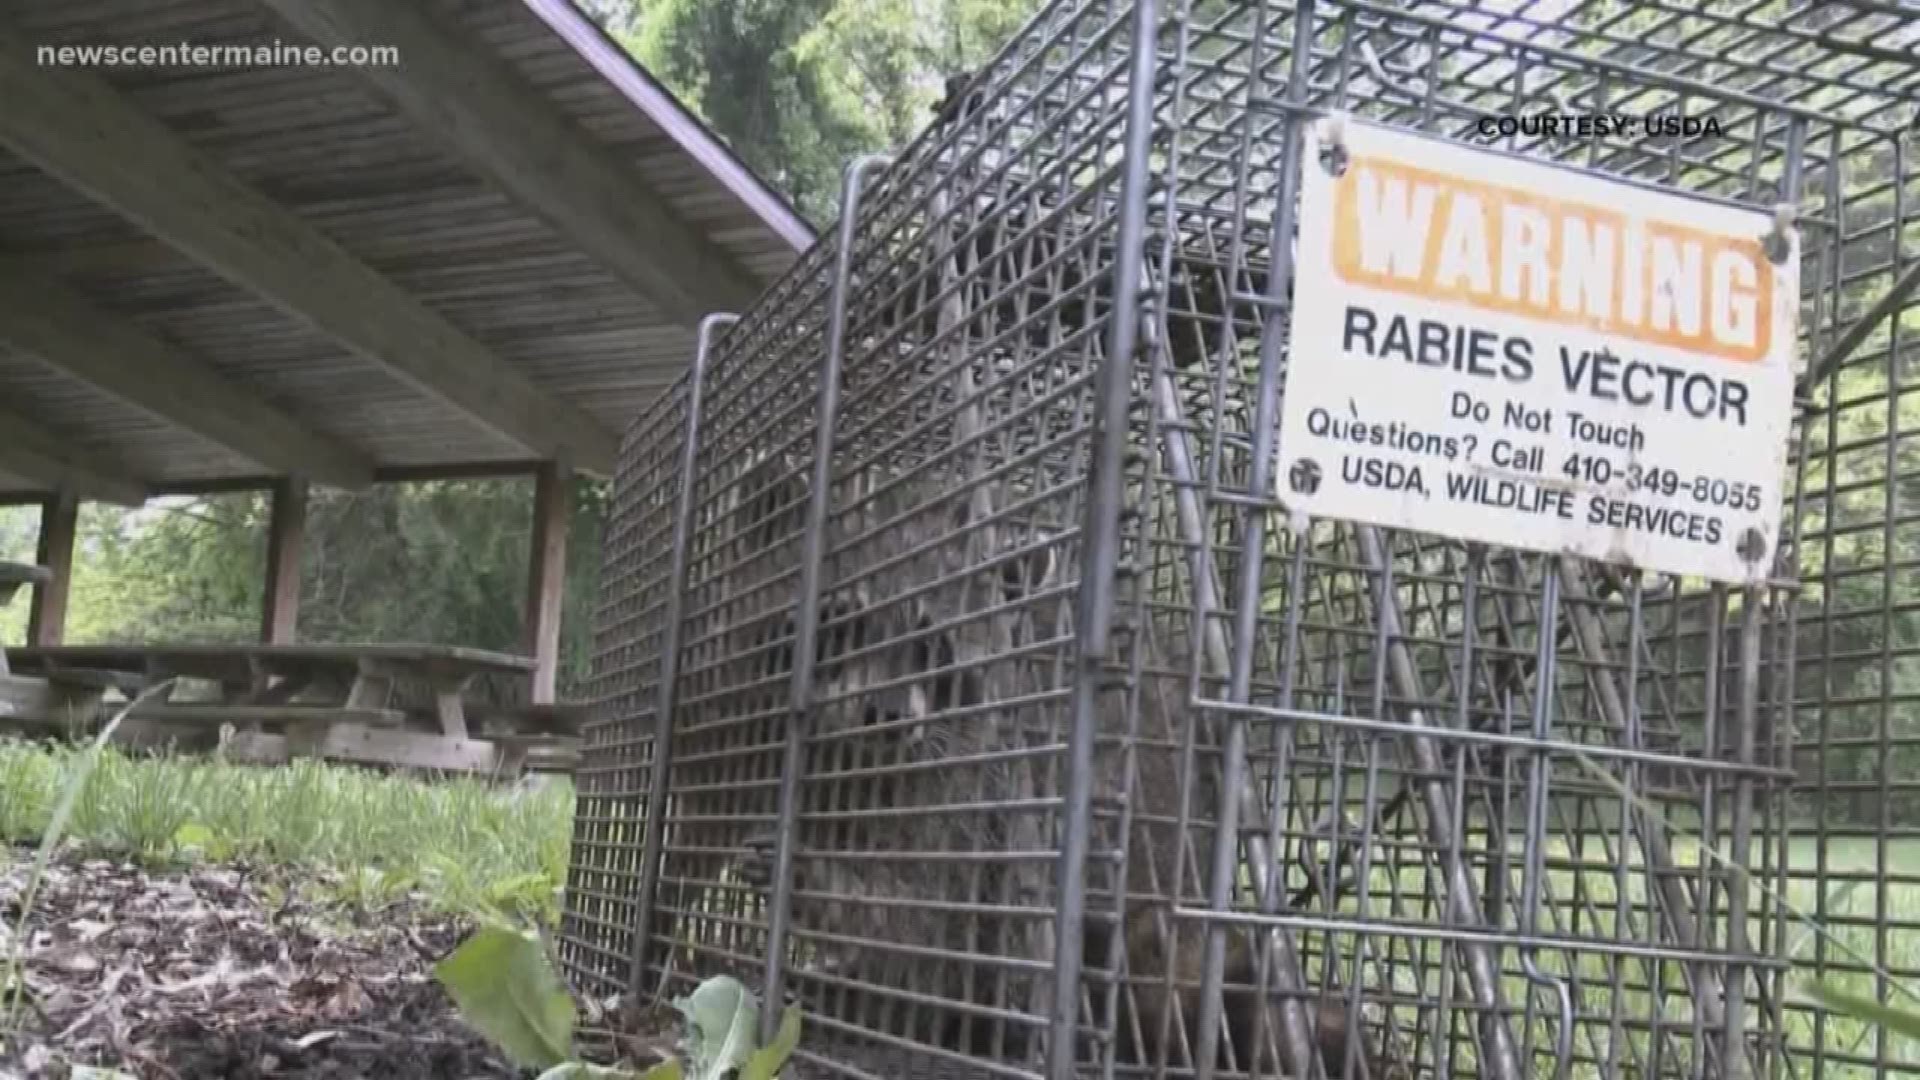 The oral rabies vaccine distribution program has been going on since 2003 to try to stop the spread of rabies in its tracks.